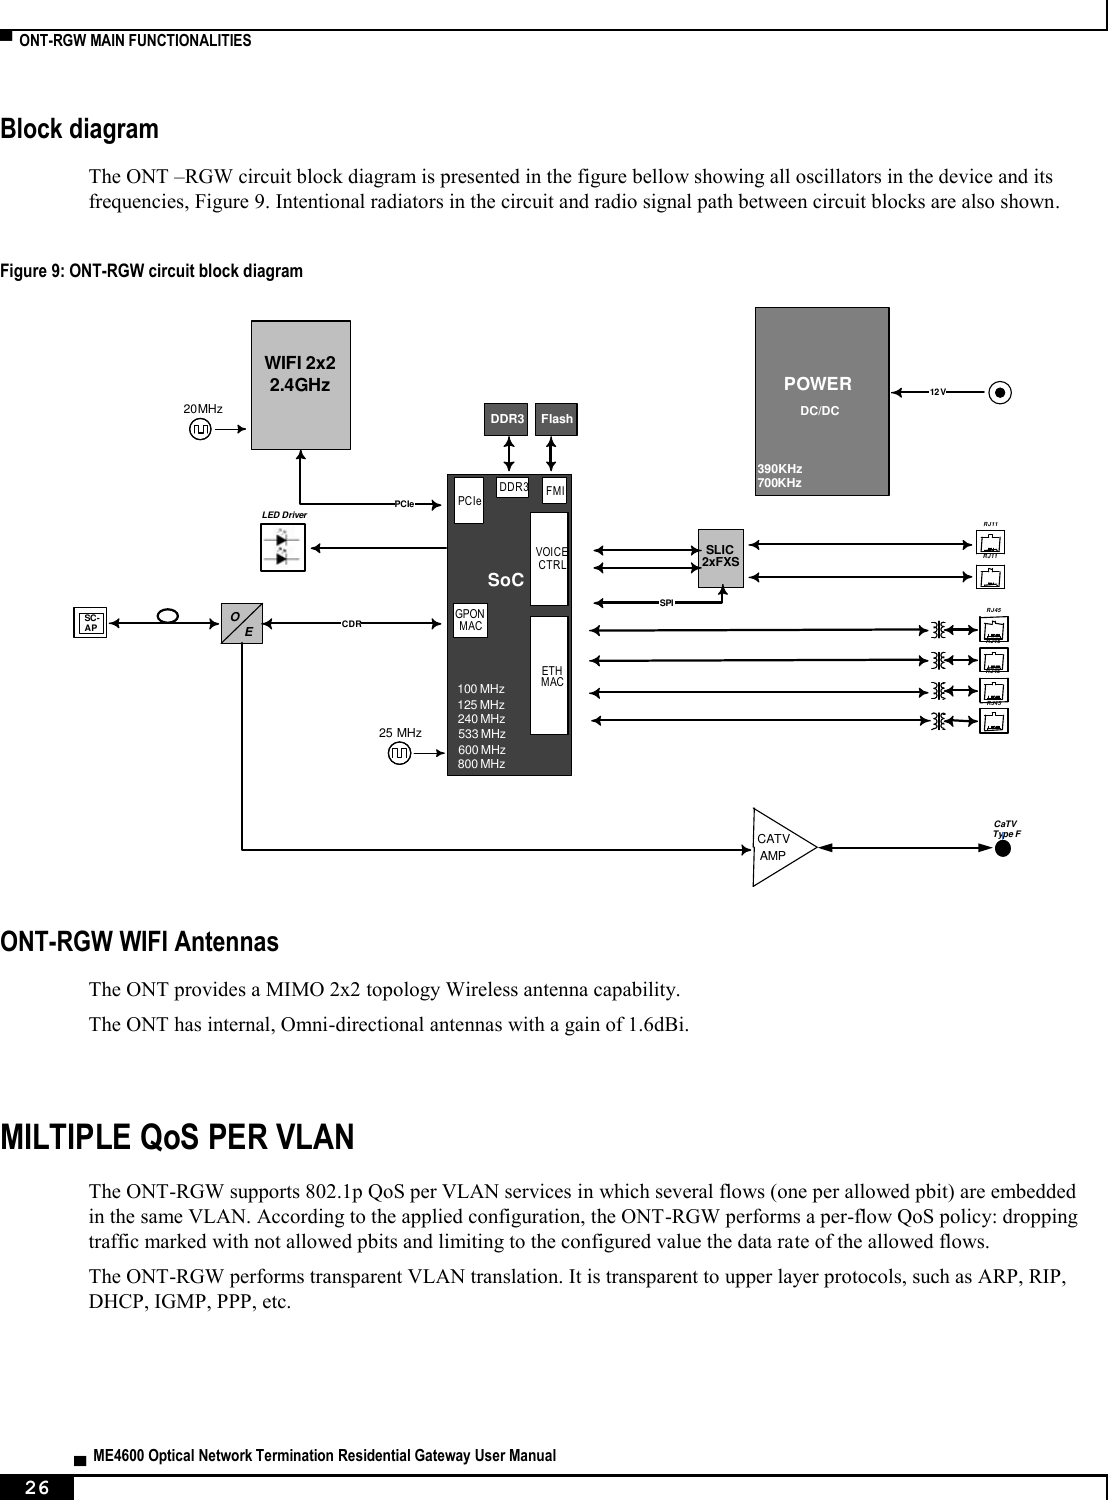  ▀  ONT-RGW MAIN FUNCTIONALITIES   ▄  ME4600 Optical Network Termination Residential Gateway User Manual 26    Block diagram The ONT –RGW circuit block diagram is presented in the figure bellow showing all oscillators in the device and its frequencies, Figure 9. Intentional radiators in the circuit and radio signal path between circuit blocks are also shown.  Figure 9: ONT-RGW circuit block diagram  ONT-RGW WIFI Antennas The ONT provides a MIMO 2x2 topology Wireless antenna capability. The ONT has internal, Omni-directional antennas with a gain of 1.6dBi.  MILTIPLE QoS PER VLAN The ONT-RGW supports 802.1p QoS per VLAN services in which several flows (one per allowed pbit) are embedded in the same VLAN. According to the applied configuration, the ONT-RGW performs a per-flow QoS policy: dropping traffic marked with not allowed pbits and limiting to the configured value the data rate of the allowed flows. The ONT-RGW performs transparent VLAN translation. It is transparent to upper layer protocols, such as ARP, RIP, DHCP, IGMP, PPP, etc. SoCGPONMACETHMACDDR3 FMIFlashSC-AP OECDR CaTVType FSLIC2xFXSSPI RJ11LED Driver PCIe PCIePOWERDC/DC12 V VOICECTRLCATVAMP390 KHz25 MHz20 MHz700 KHz100 MHz125 MHz240 MHz533 MHz600 MHz800 MHzWIFI 2x22.4GHzDDR3RJ11RJ45RJ45RJ45RJ45